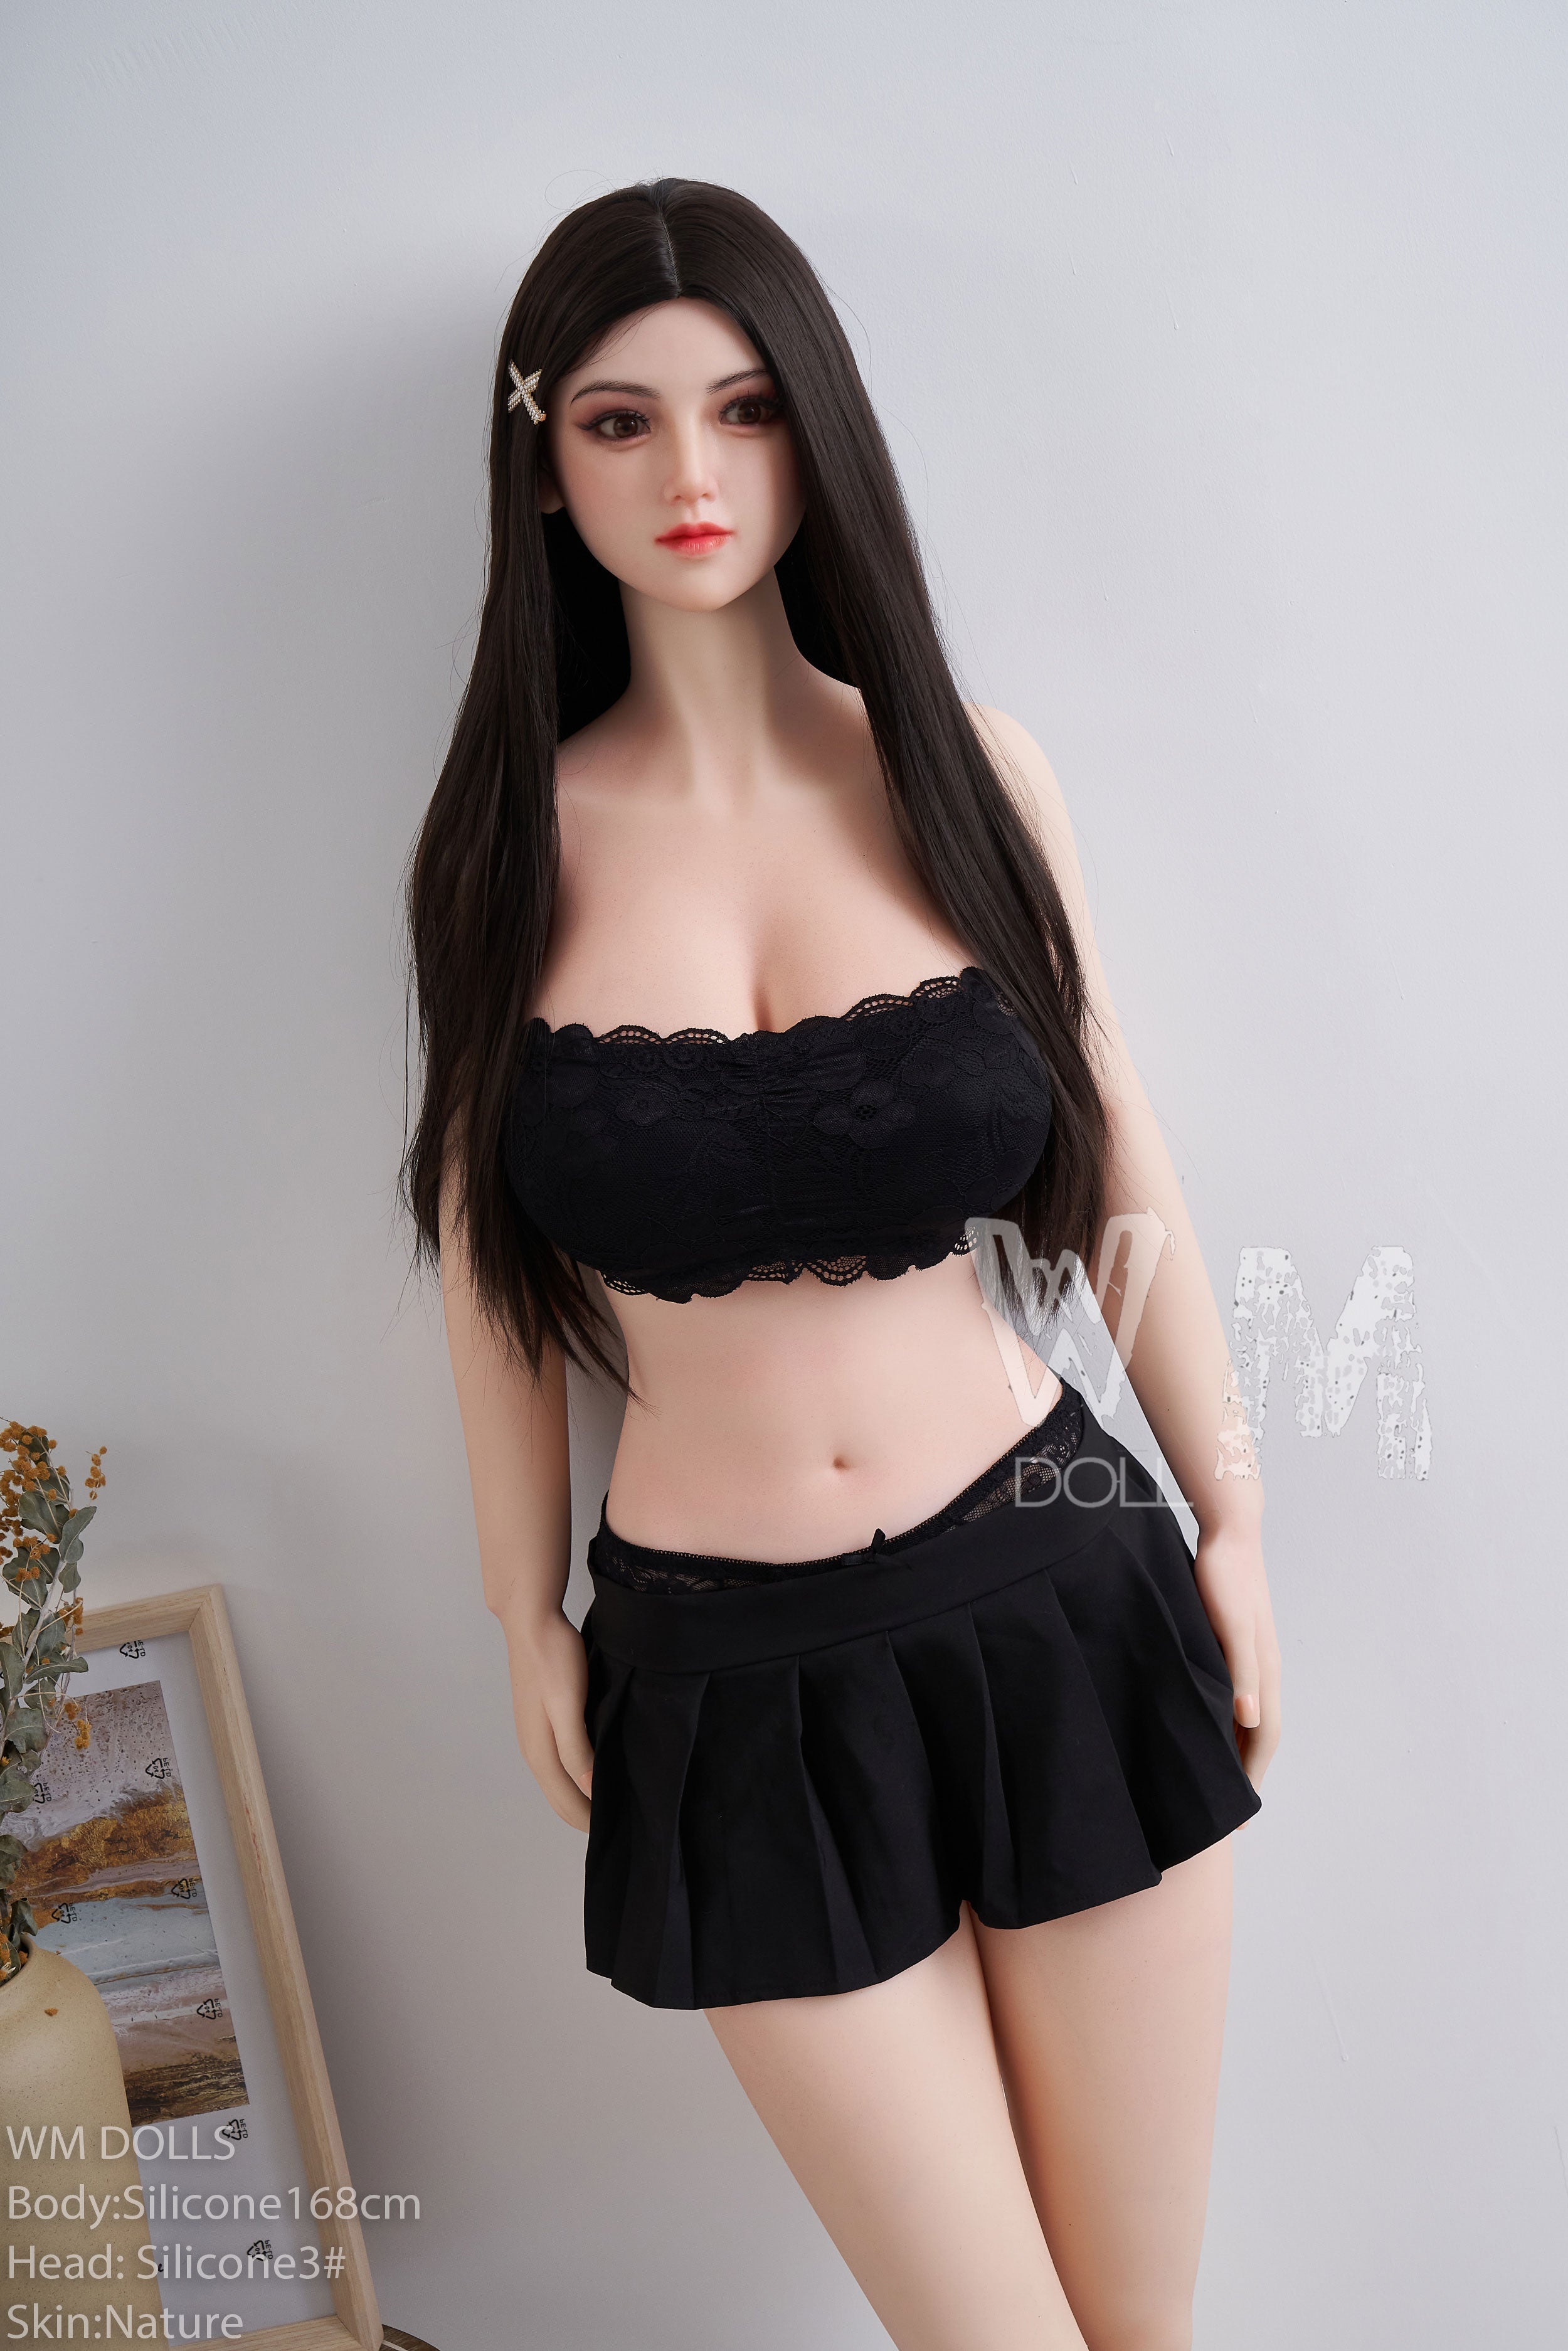 WM Doll 168 cm E Silicone - Charlie | Buy Sex Dolls at DOLLS ACTUALLY